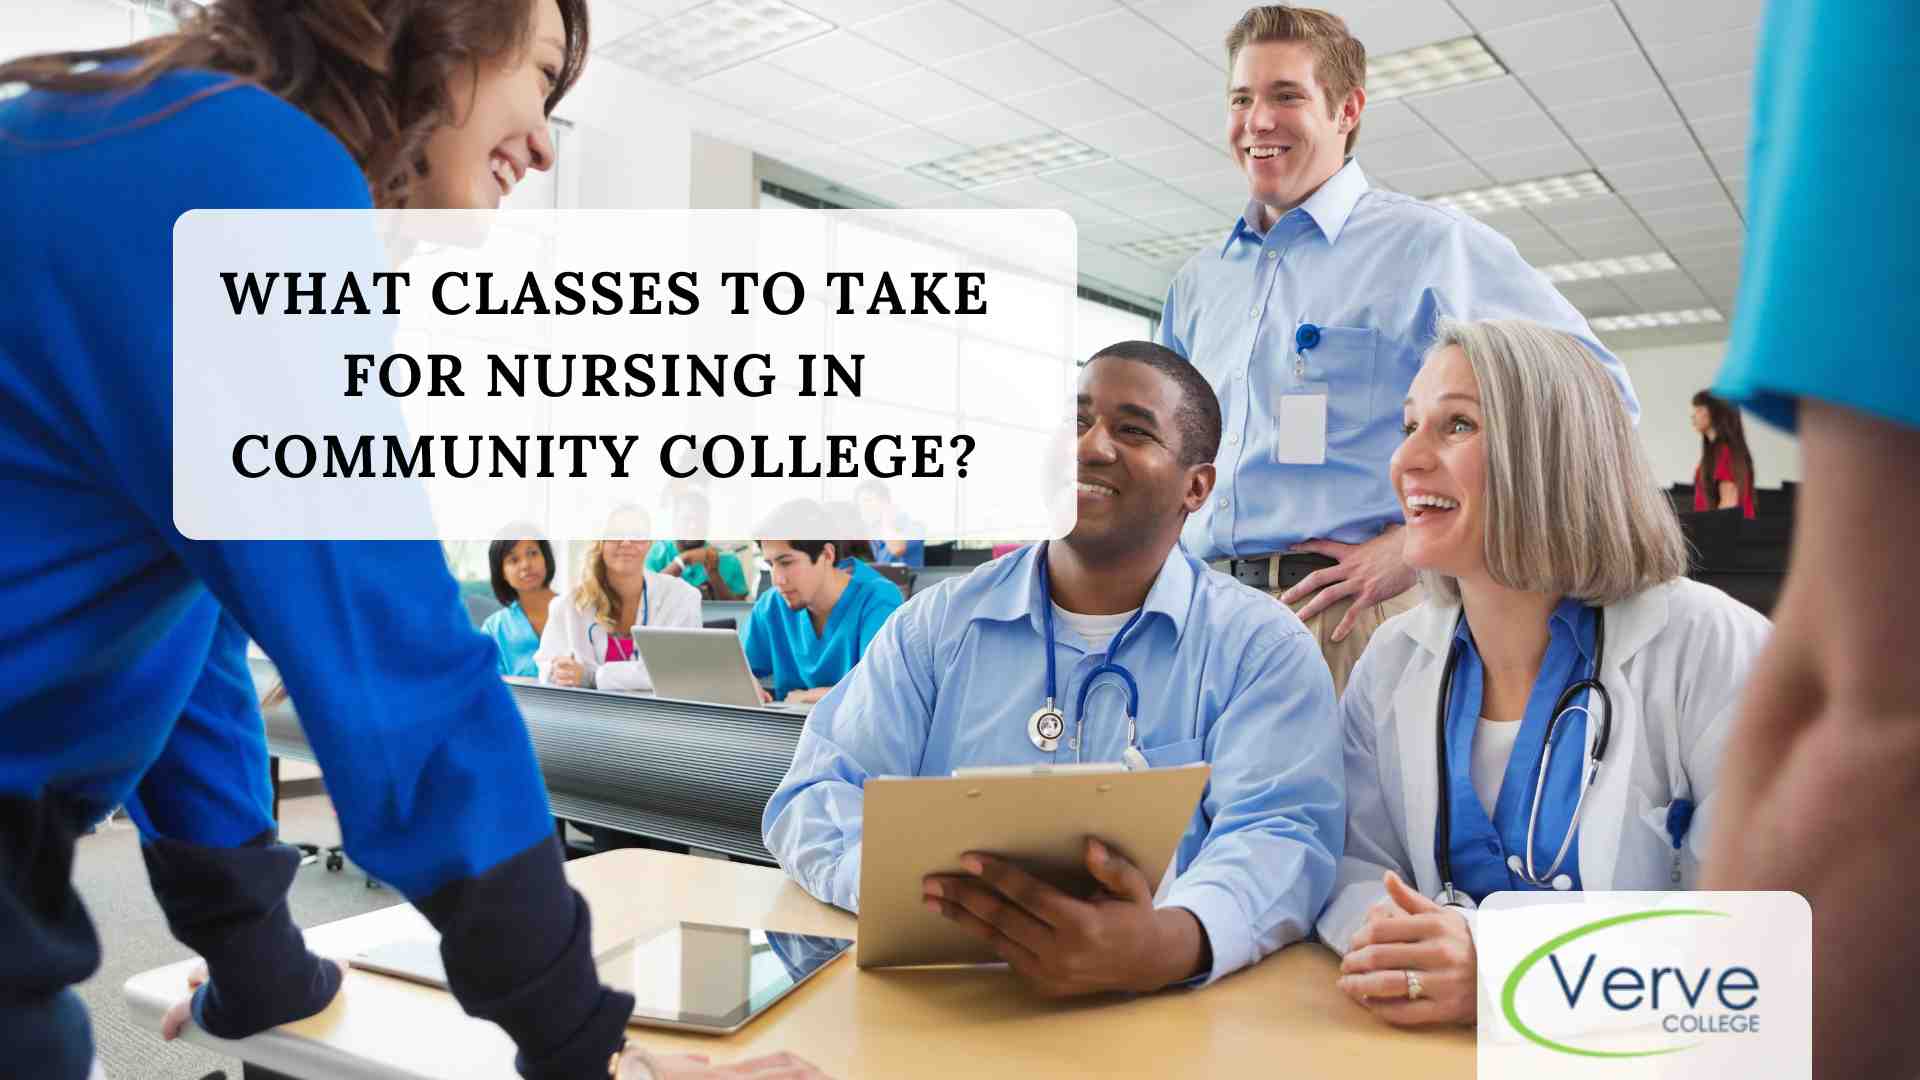 What Classes Should You Take for Nursing in Community College?